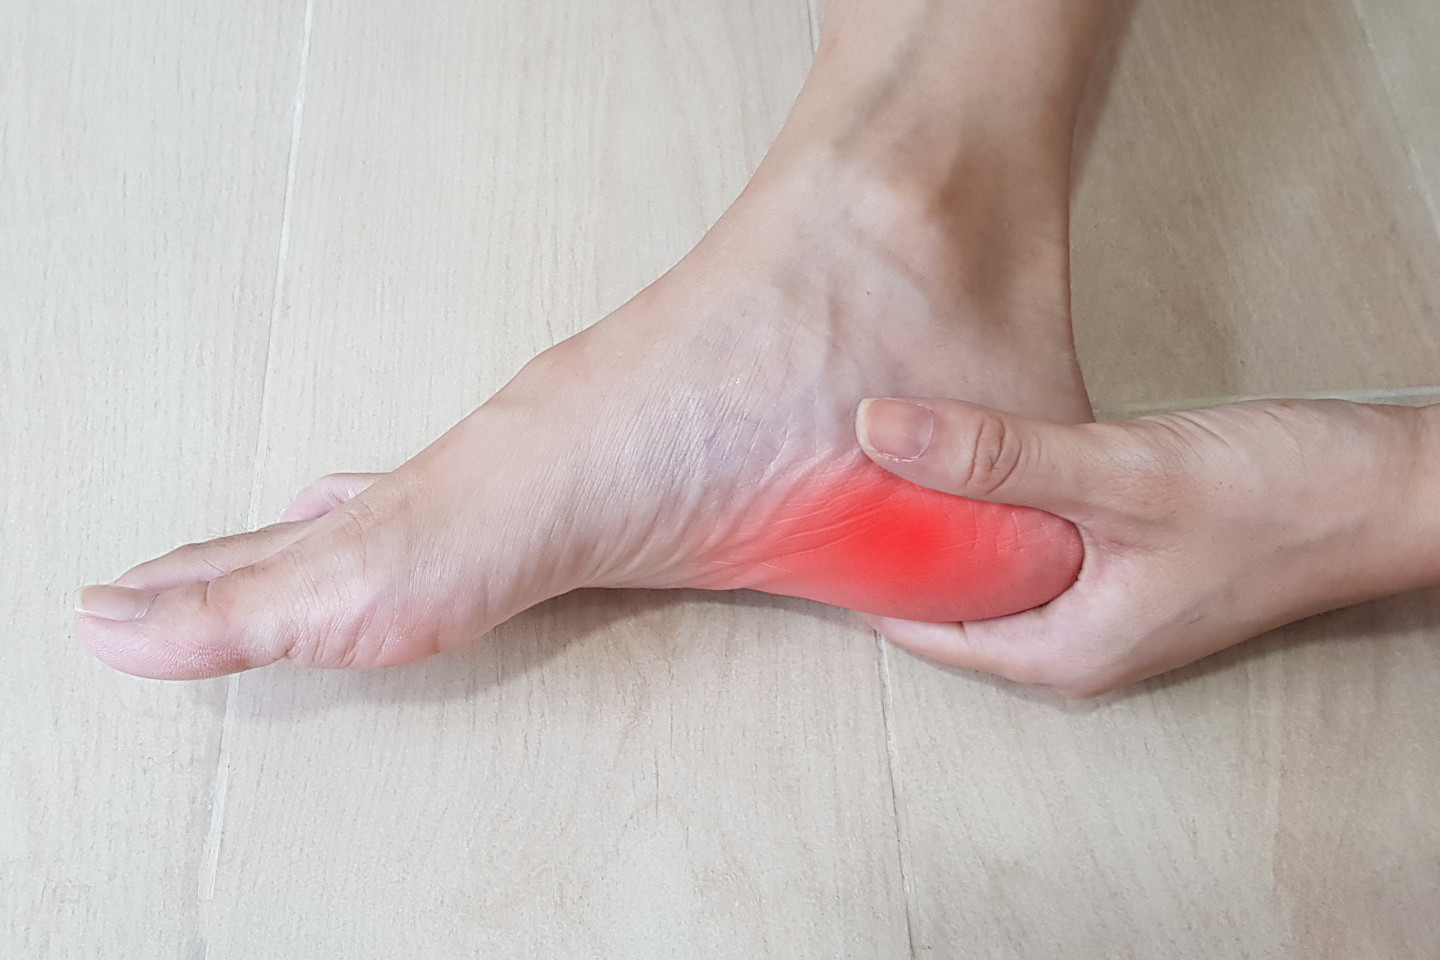 Severs disease: Causes, Symptoms and Treatment | Sanders Podiatry